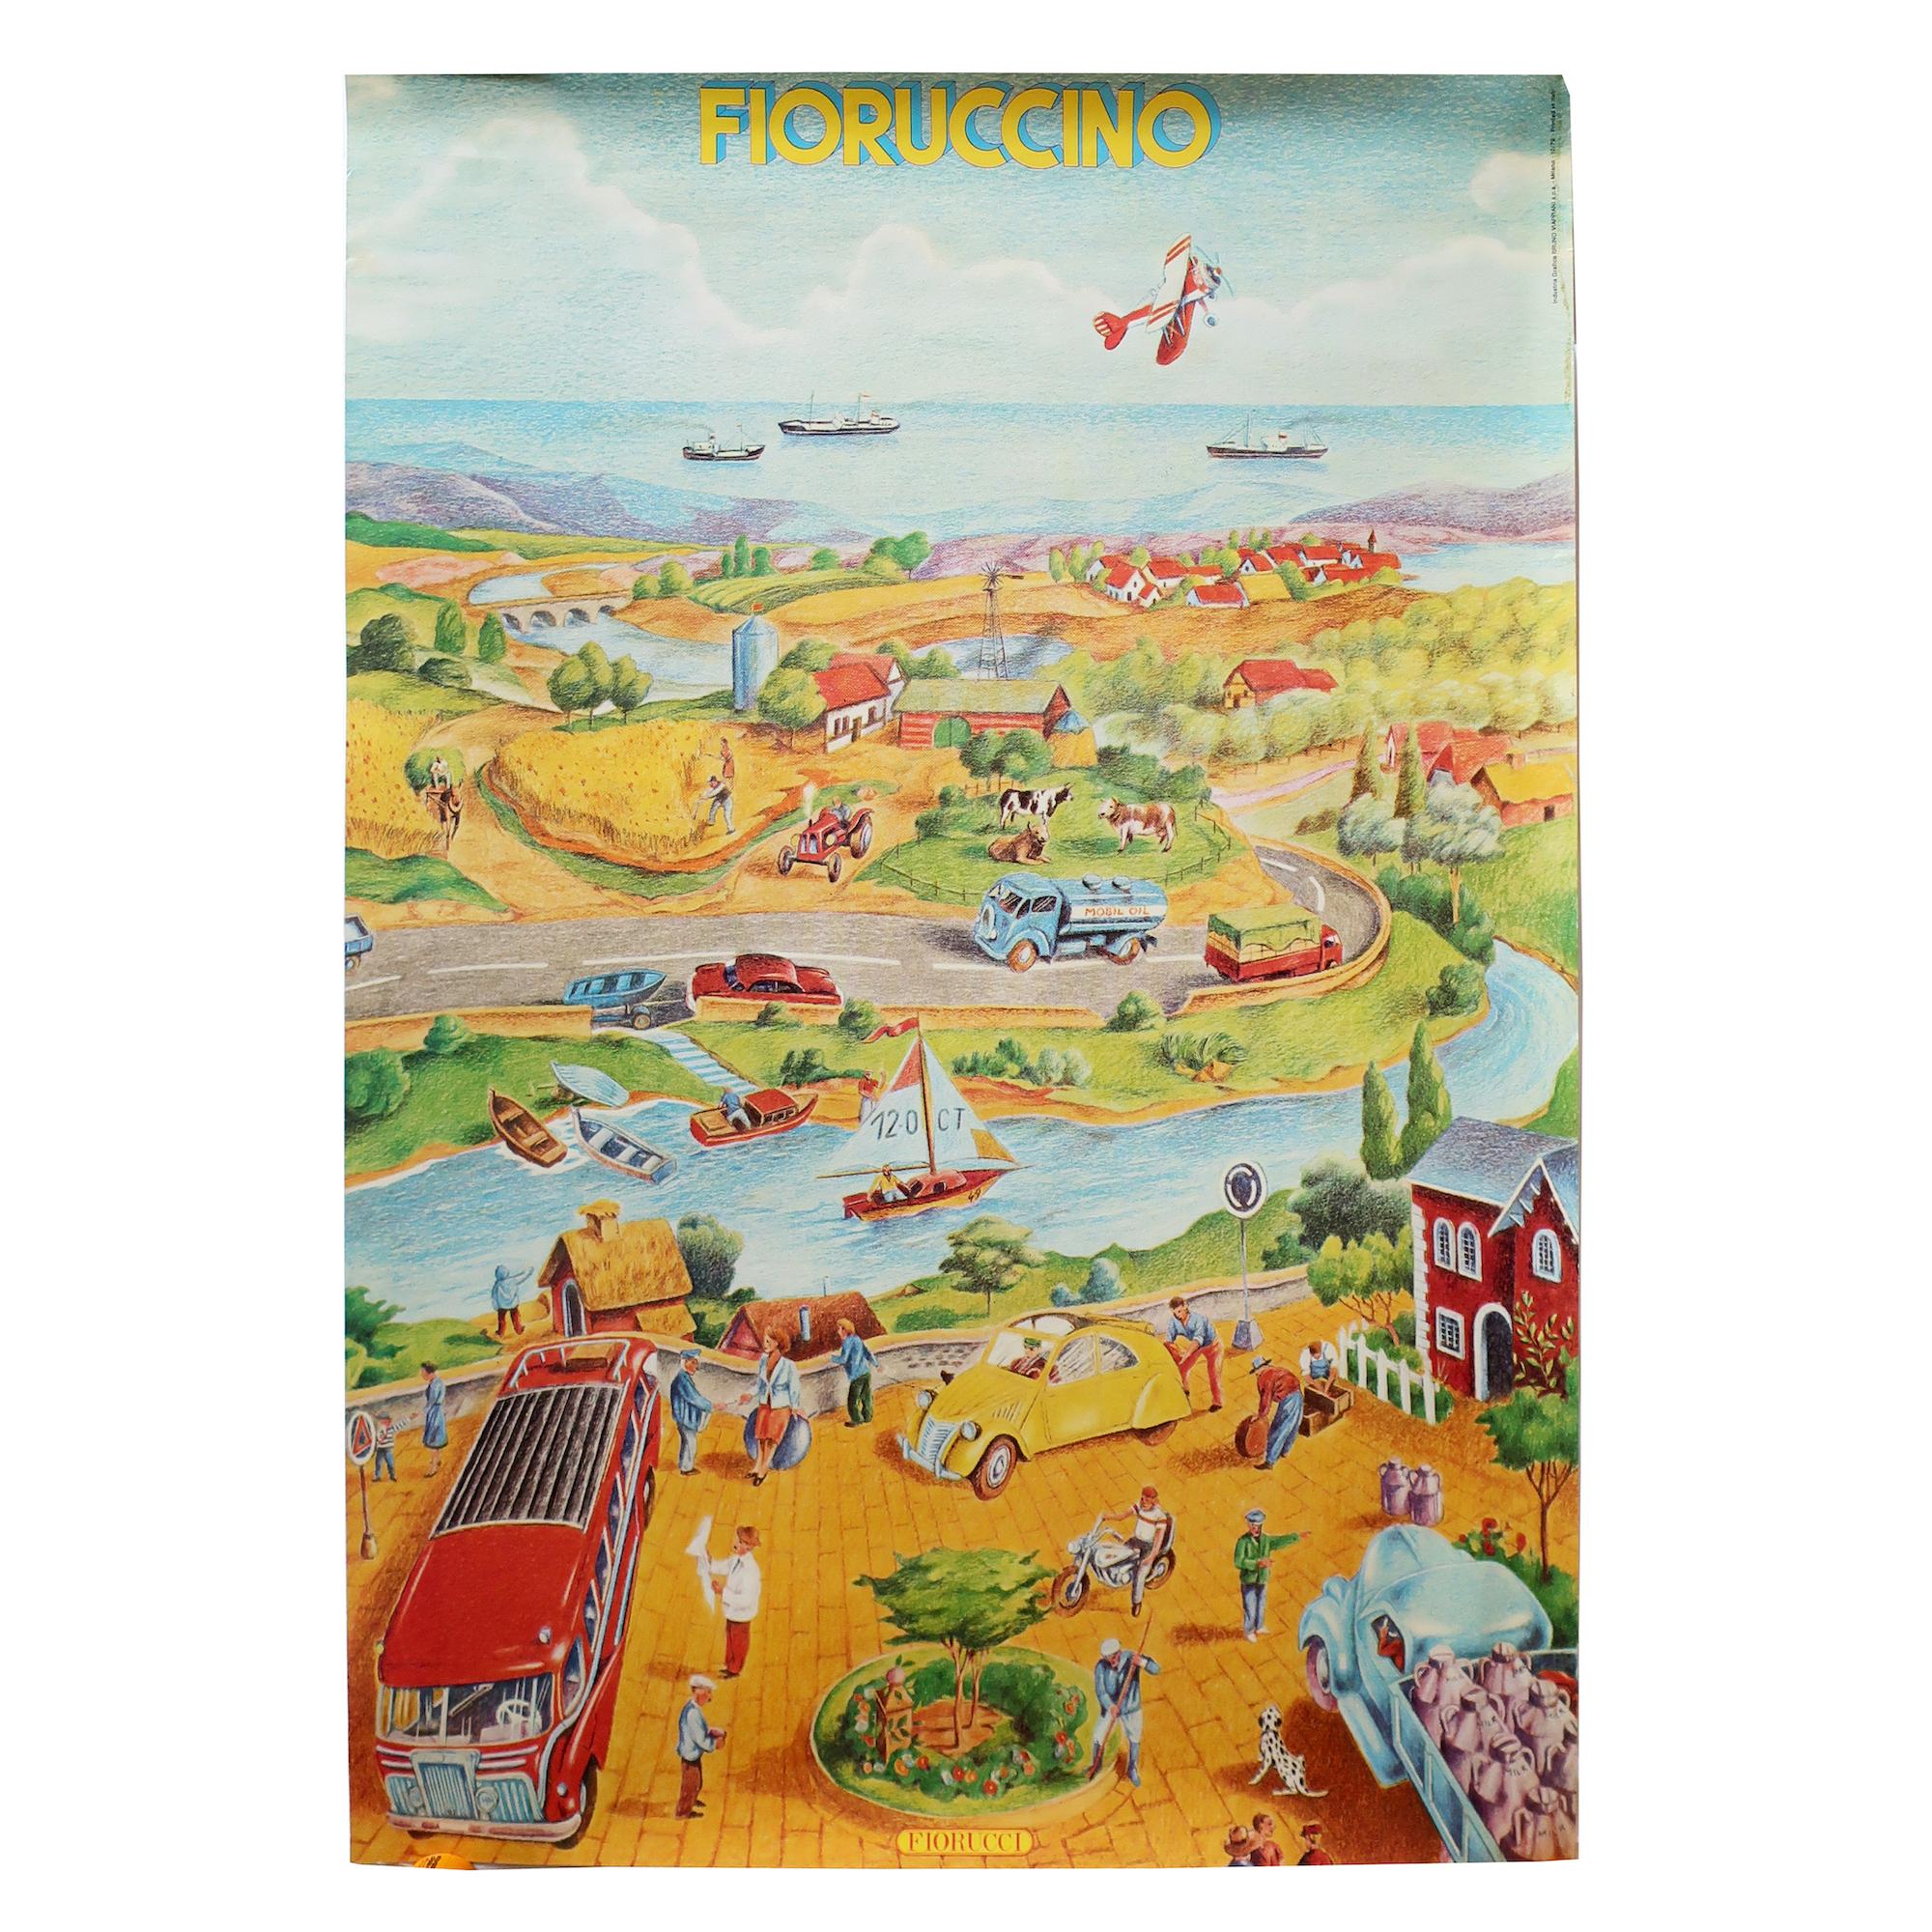 A vintage and rare illustrated Fiorucci poster with a view across the mid-century Italian countryside, from a town square across a river and over a highway through farmlands and on to the distant sea.  From 1979, the poster includes amazing